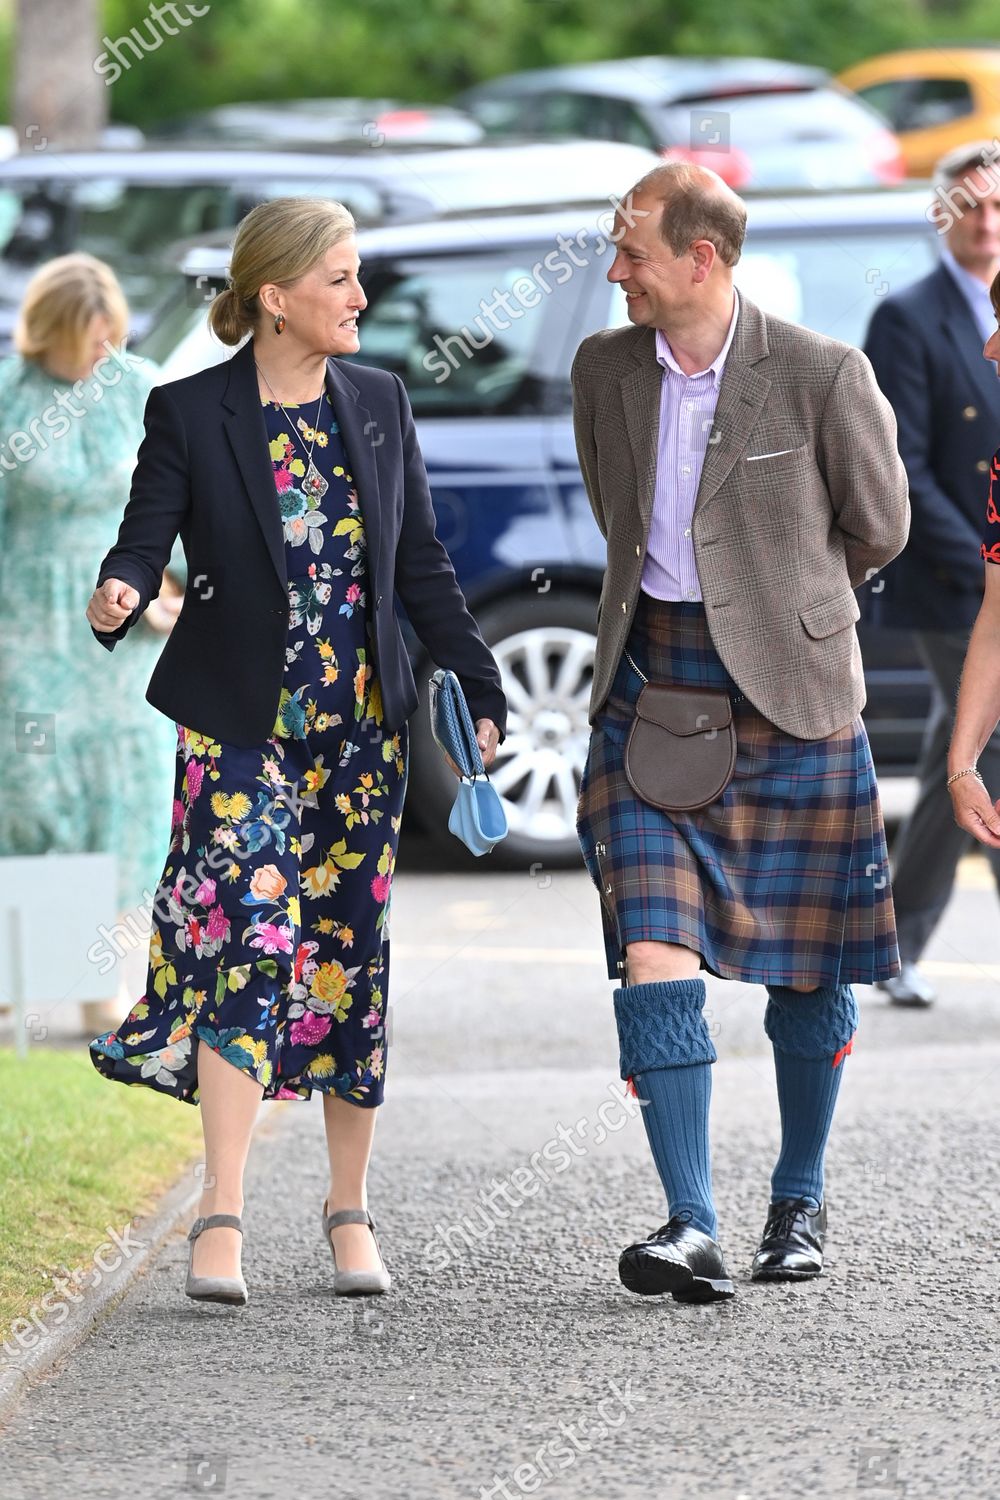 CASA REAL BRITÁNICA - Página 76 Prince-edward-and-sophie-countess-of-wessex-visit-to-forfar-golf-club-scotland-uk-shutterstock-editorial-12172307l